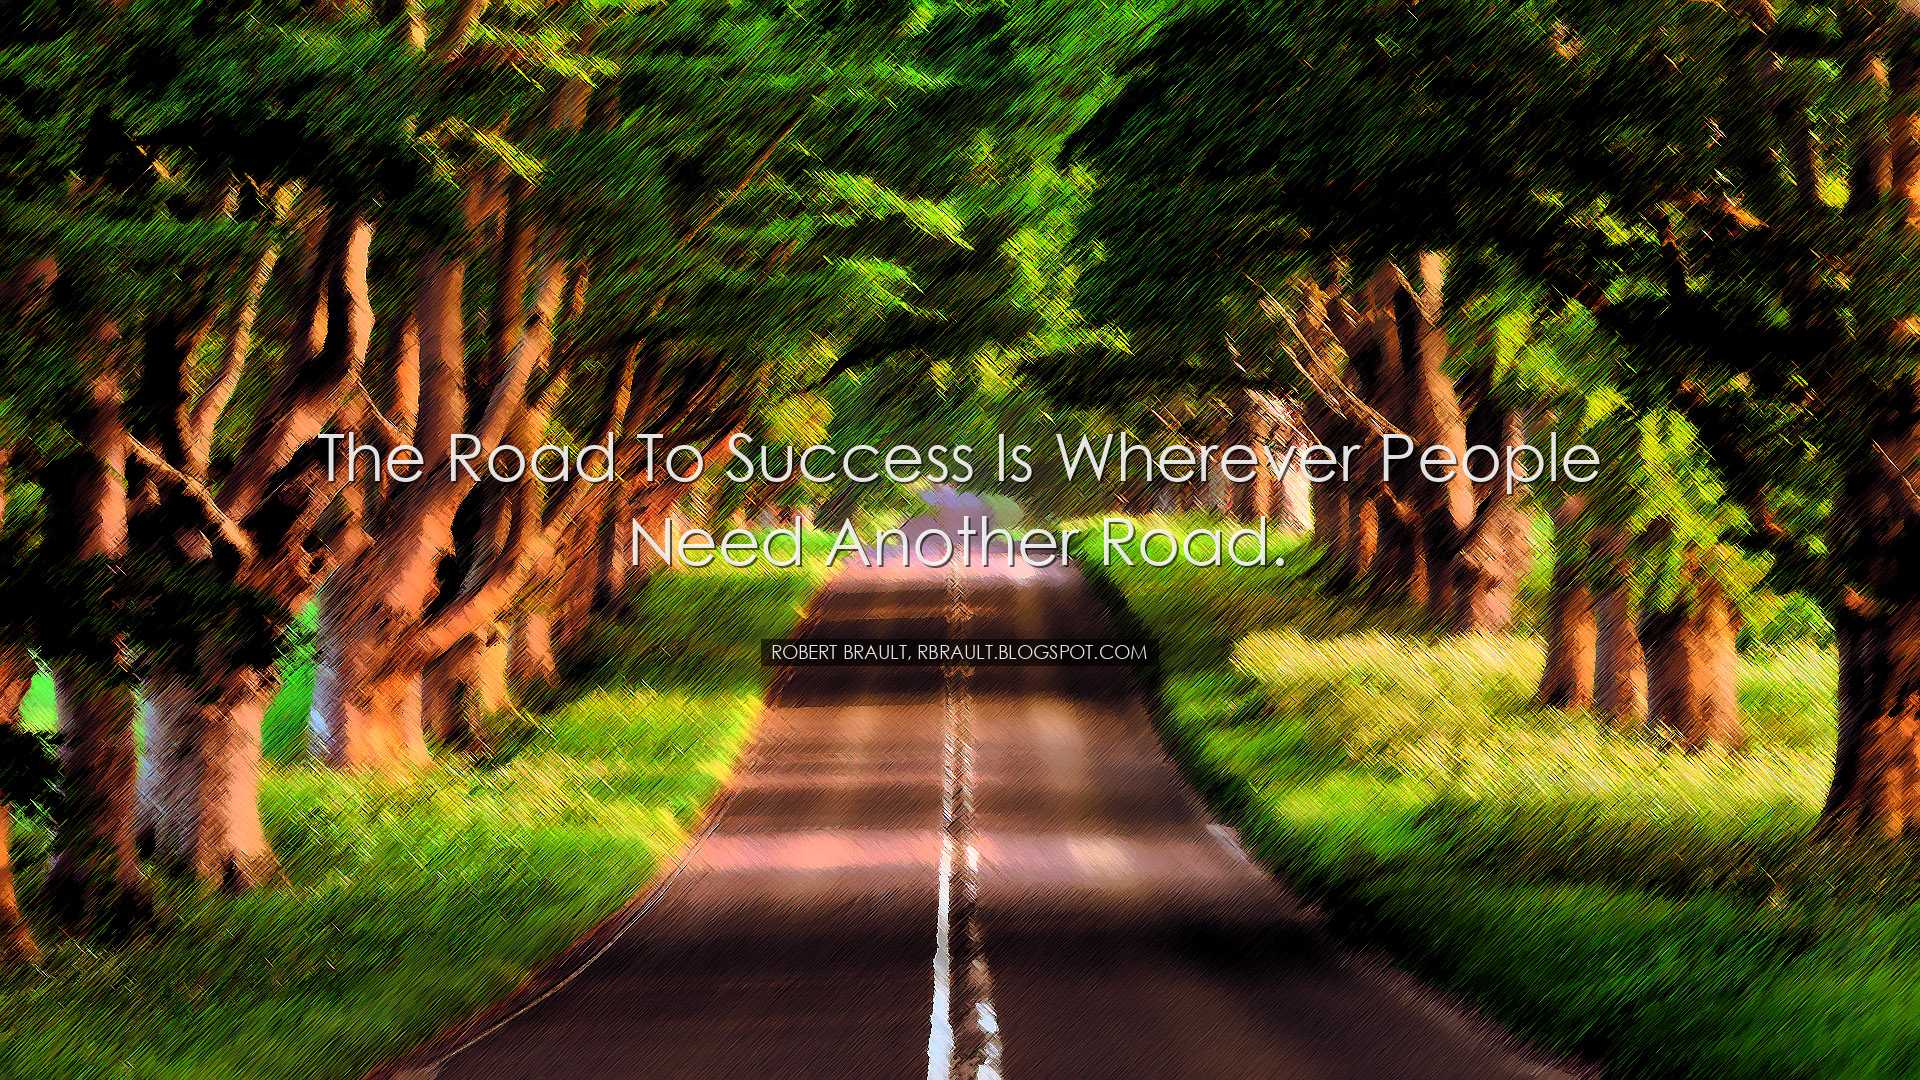 The road to success is wherever people need another road. - Robert